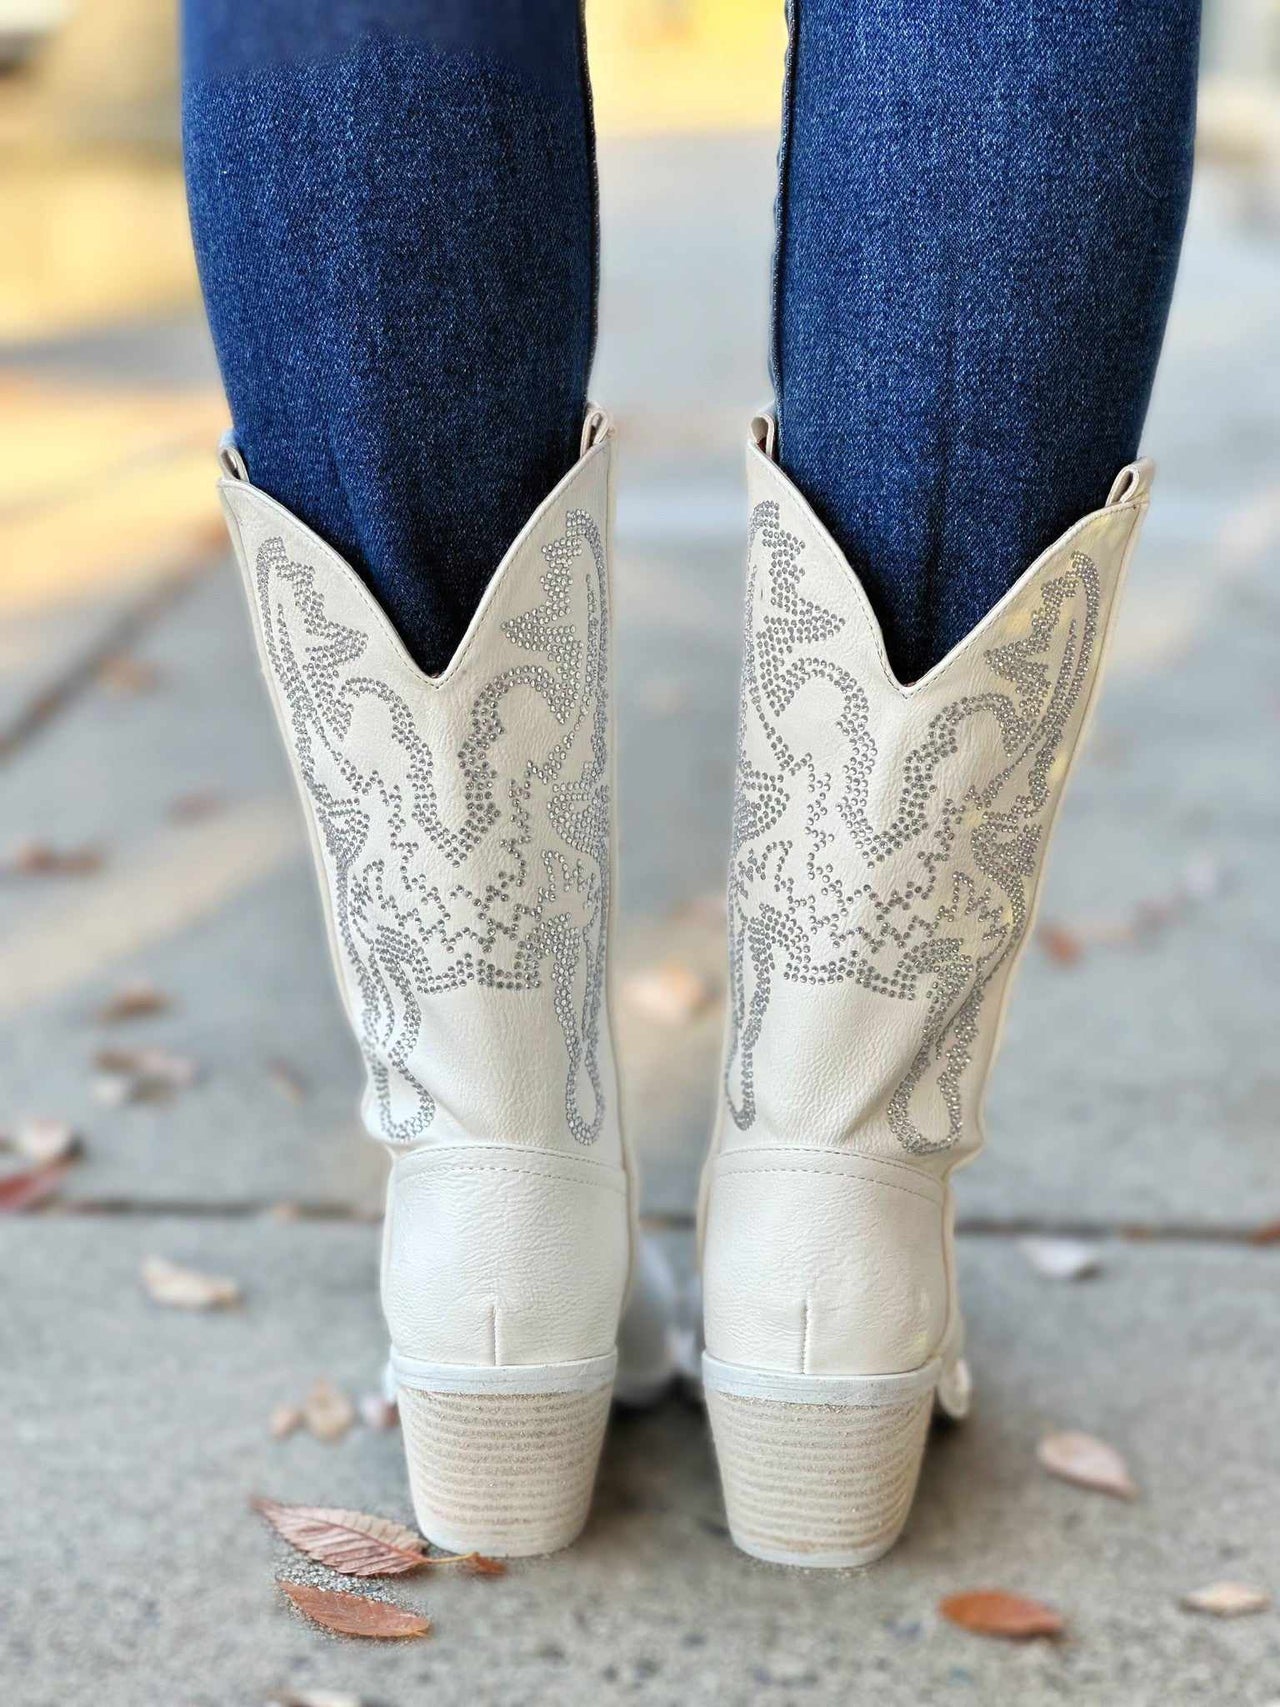 Making A Statement Boot - White